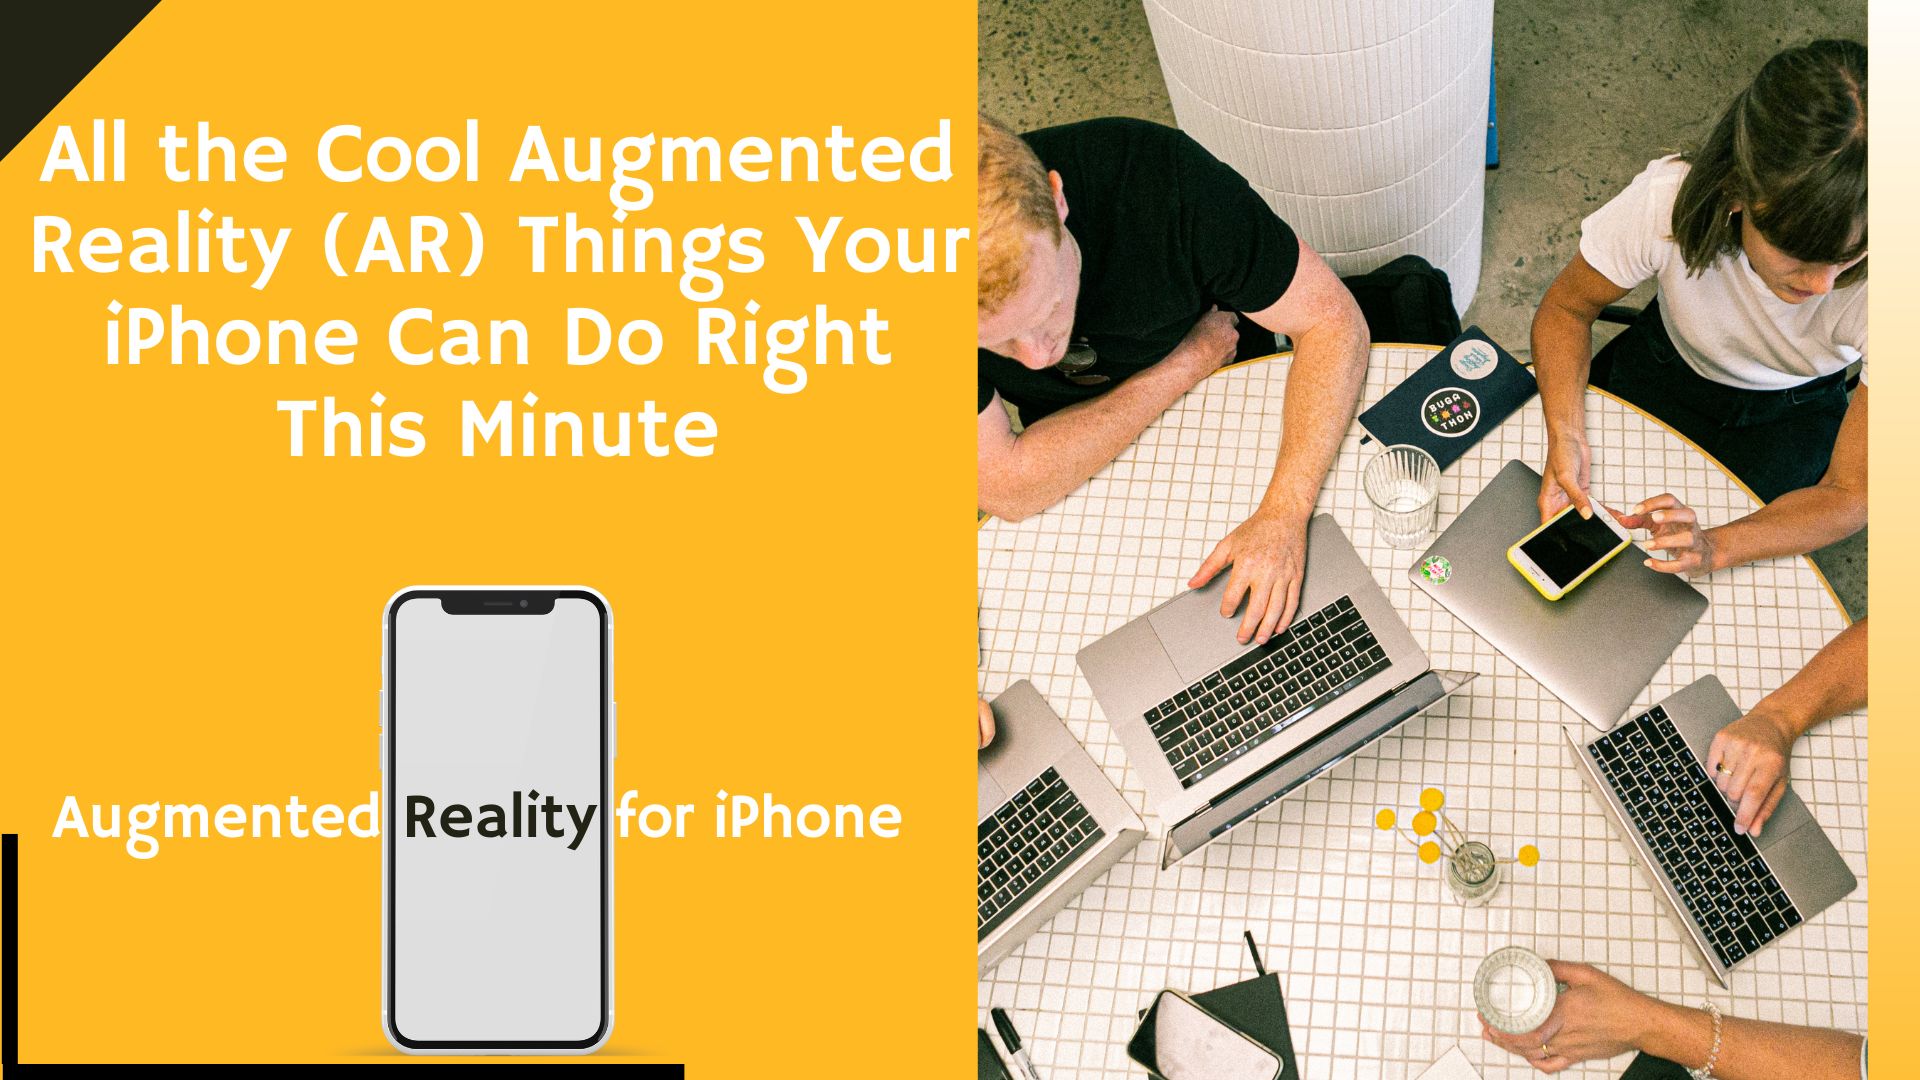 All the Cool Augmented Reality (AR) Things Your iPhone Can Do Right This Minute